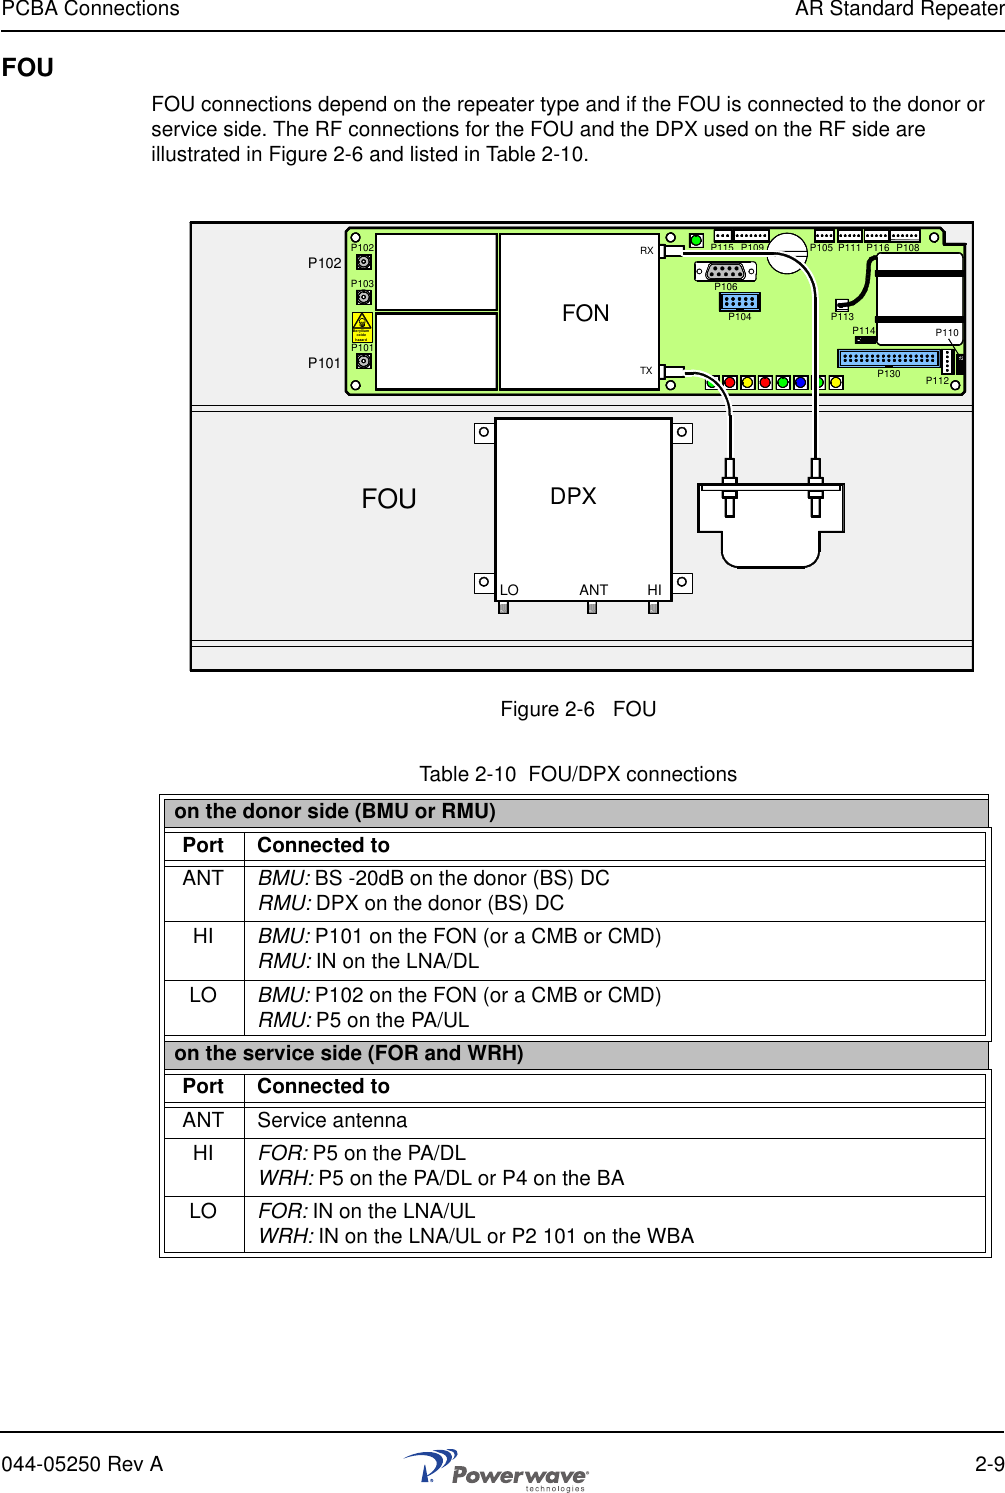 PCBA Connections AR Standard Repeater044-05250 Rev A 2-9FOUFOU connections depend on the repeater type and if the FOU is connected to the donor or service side. The RF connections for the FOU and the DPX used on the RF side are illustrated in Figure 2-6 and listed in Table 2-10. Figure 2-6   FOUTable 2-10  FOU/DPX connectionson the donor side (BMU or RMU)Port Connected toANT BMU: BS -20dB on the donor (BS) DCRMU: DPX on the donor (BS) DCHI BMU: P101 on the FON (or a CMB or CMD)RMU: IN on the LNA/DLLO BMU: P102 on the FON (or a CMB or CMD)RMU: P5 on the PA/ULon the service side (FOR and WRH)Port Connected toANT Service antennaHI FOR: P5 on the PA/DLWRH: P5 on the PA/DL or P4 on the BALO FOR: IN on the LNA/ULWRH: IN on the LNA/UL or P2 101 on the WBAP102P130BerylliumoxidehazardP103P101P114P108P116P111P105P109P115P106P104RXTXP113P112P110FONDPXANTLO HIP102P101FOU